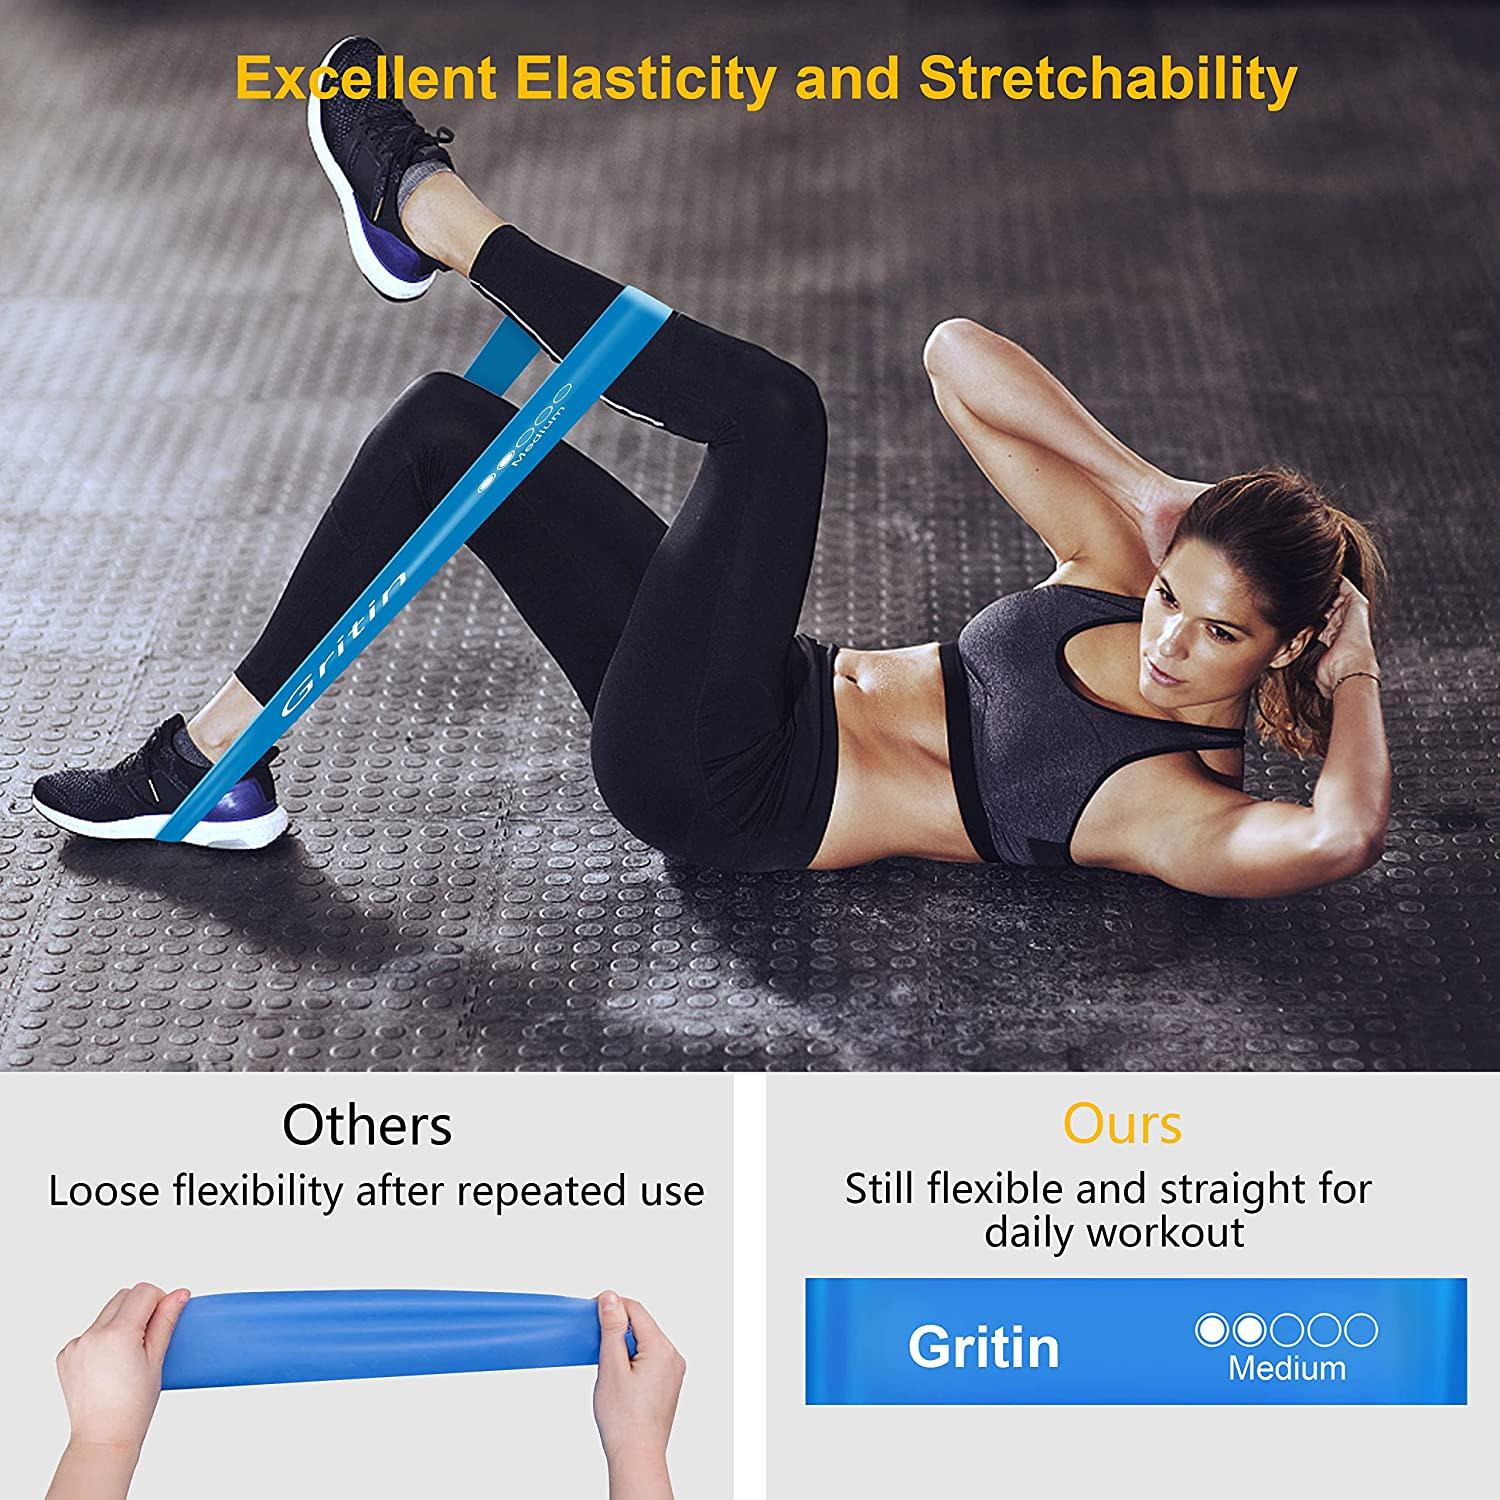 Gritin Resistance Bands, Set of 5 Skin-Friendly Resistance Fitness Exercise  Loop Bands with 5 Different Resistance Levels - Carrying Case Included -  Ideal for Home, Gym, Yoga, Training Green - Blue- Yellow - Pink - Black